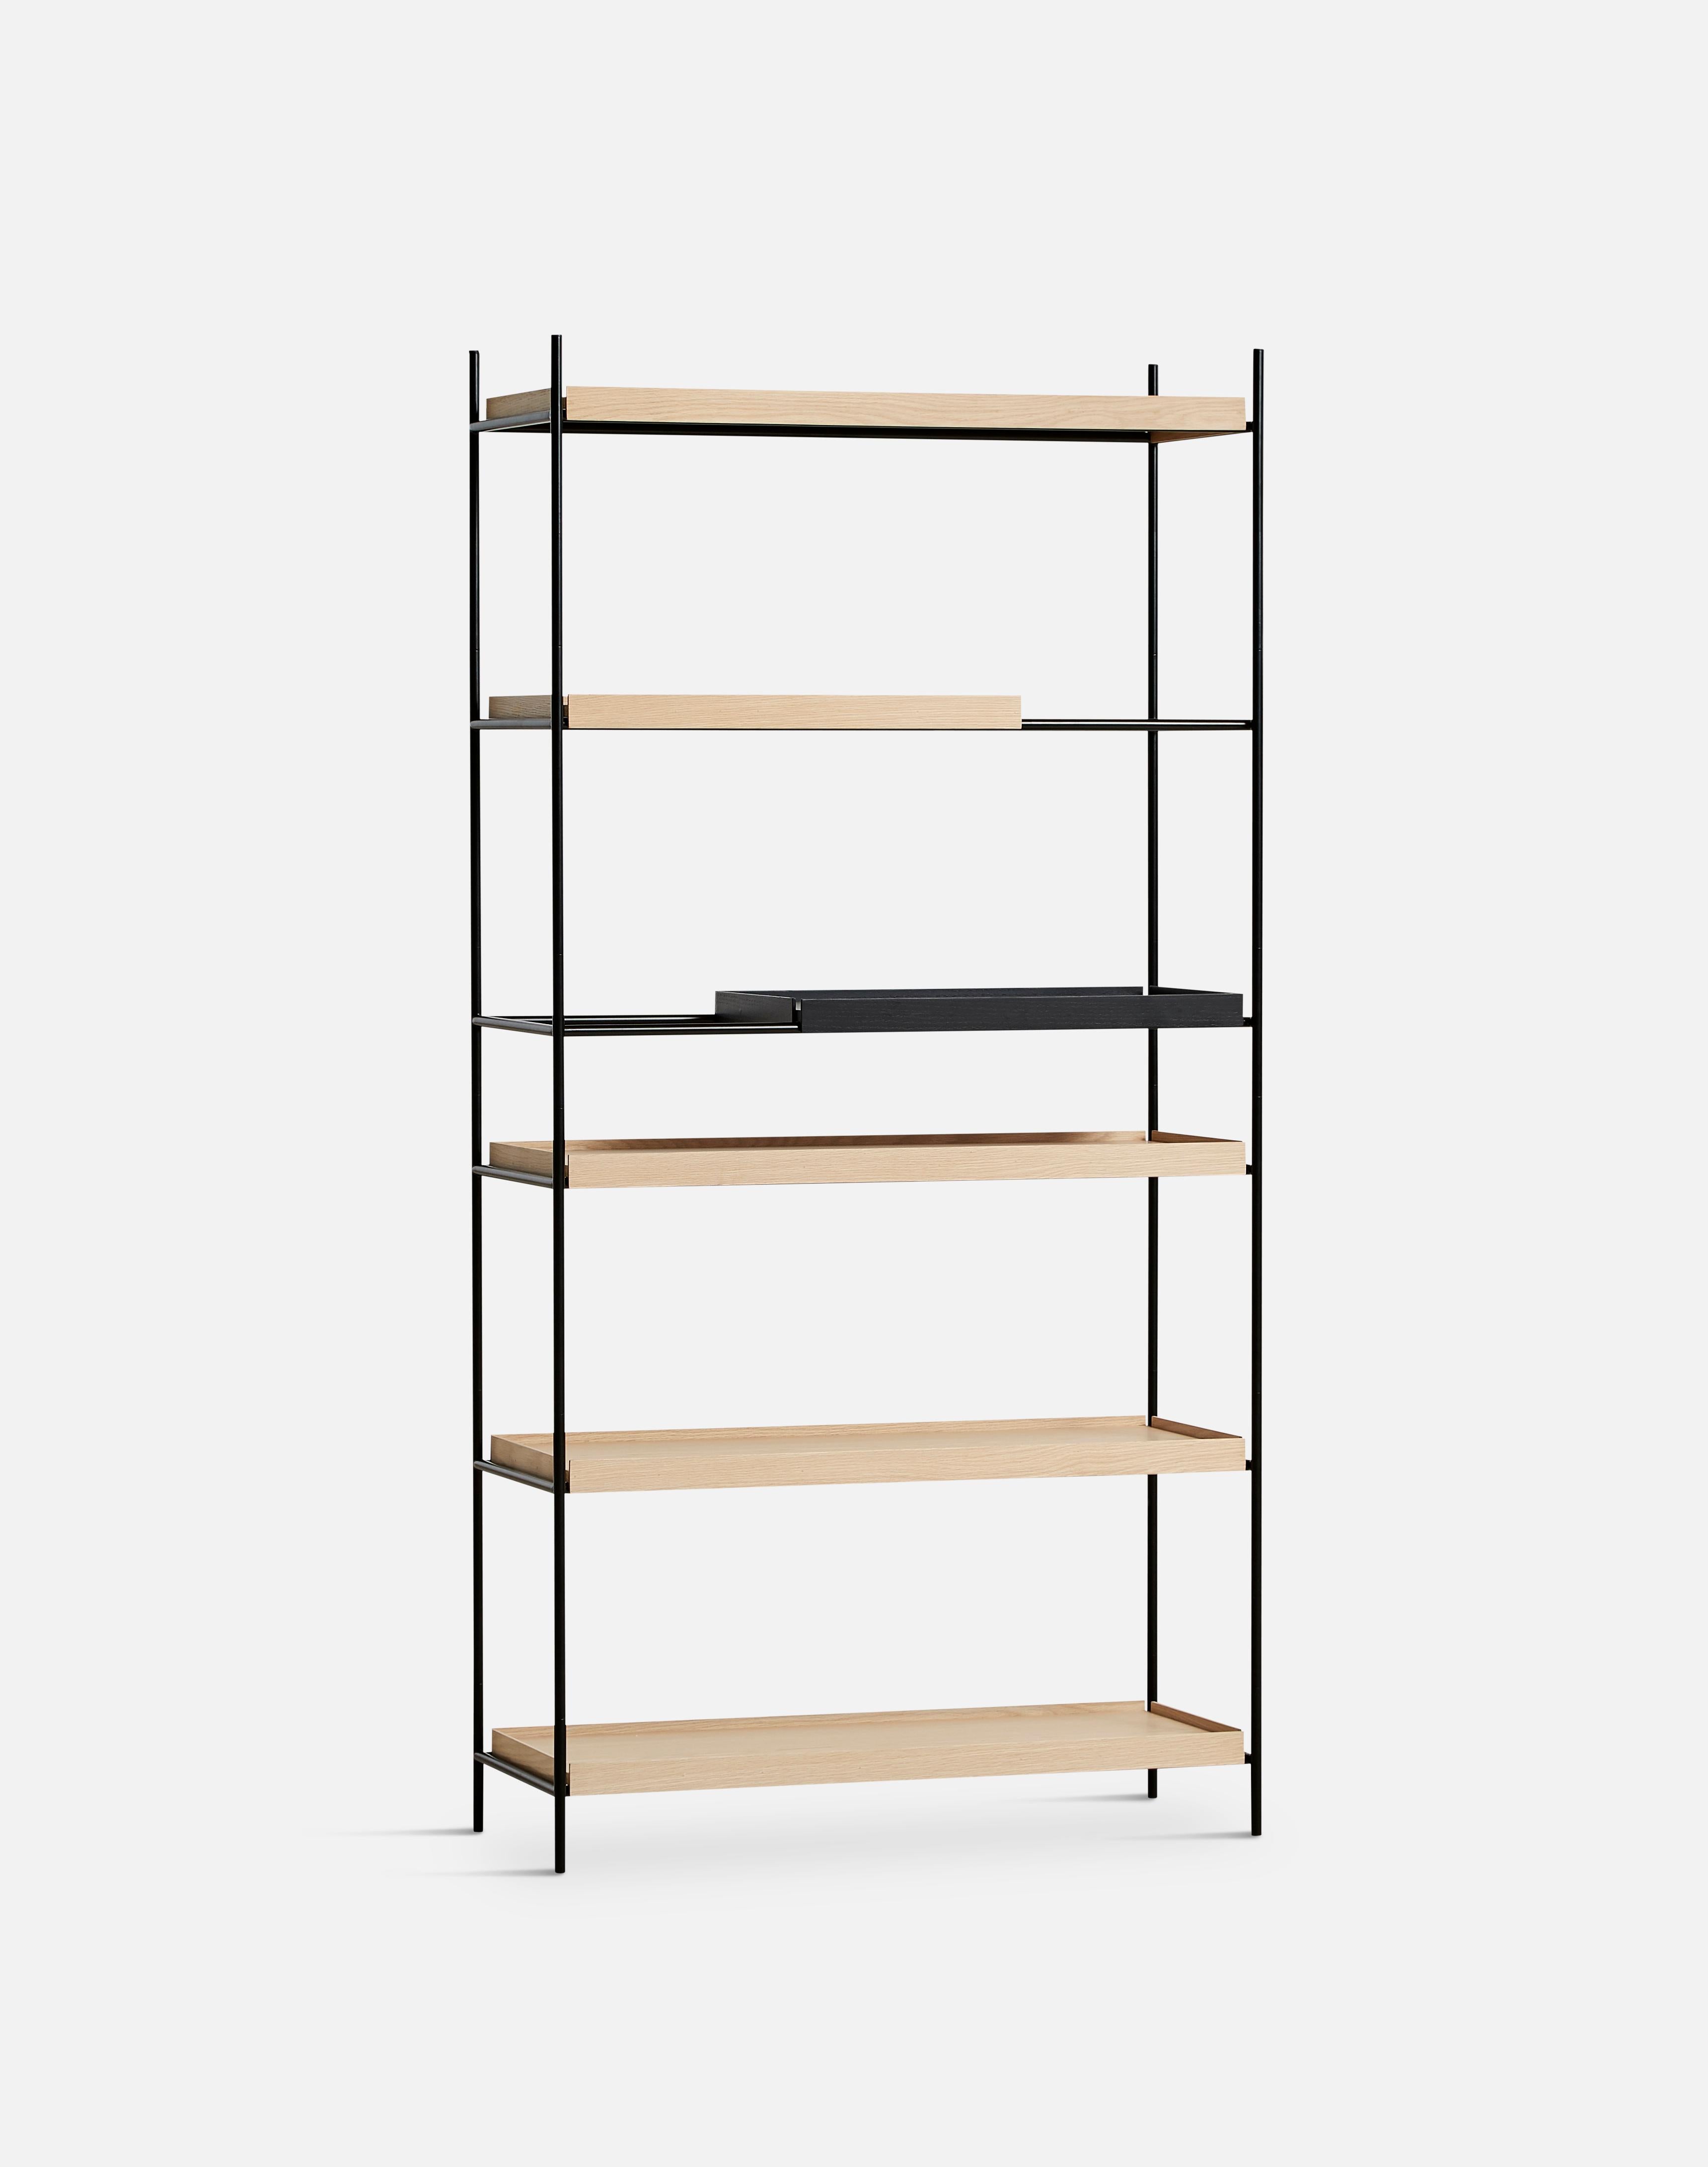 High oak and black tray shelf V by Hanne Willmann
Materials: Metal, oak.
Dimensions: D 40 x W 100 x H 201 cm.
Also available in different tray combinations and 2 sizes: H81, H 201 cm.

Hanne Willmann is a dynamic German designer with her own